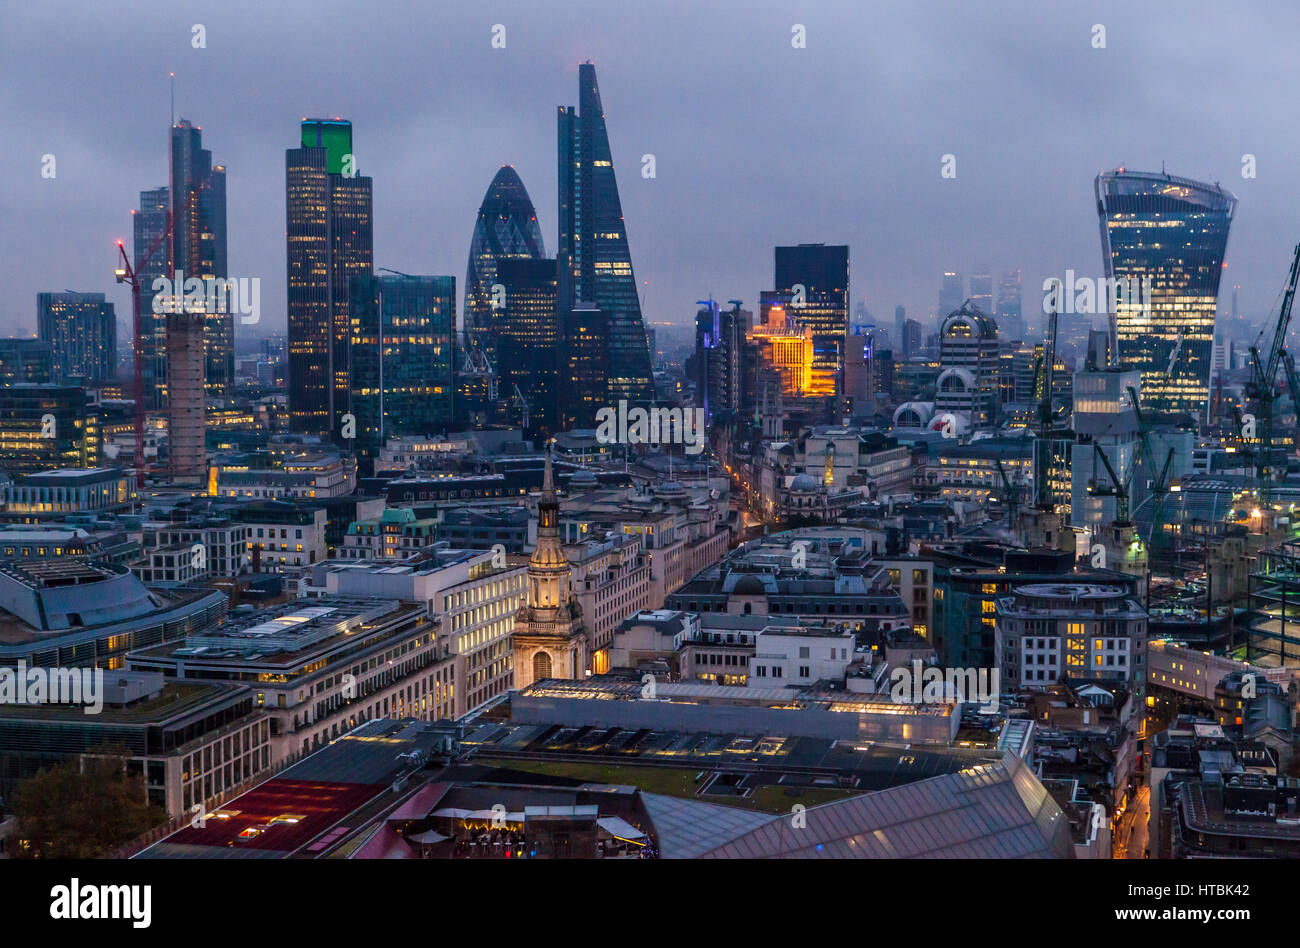 A view of the London Financial District from atop St Paul's Cathedral, UK. Stock Photo